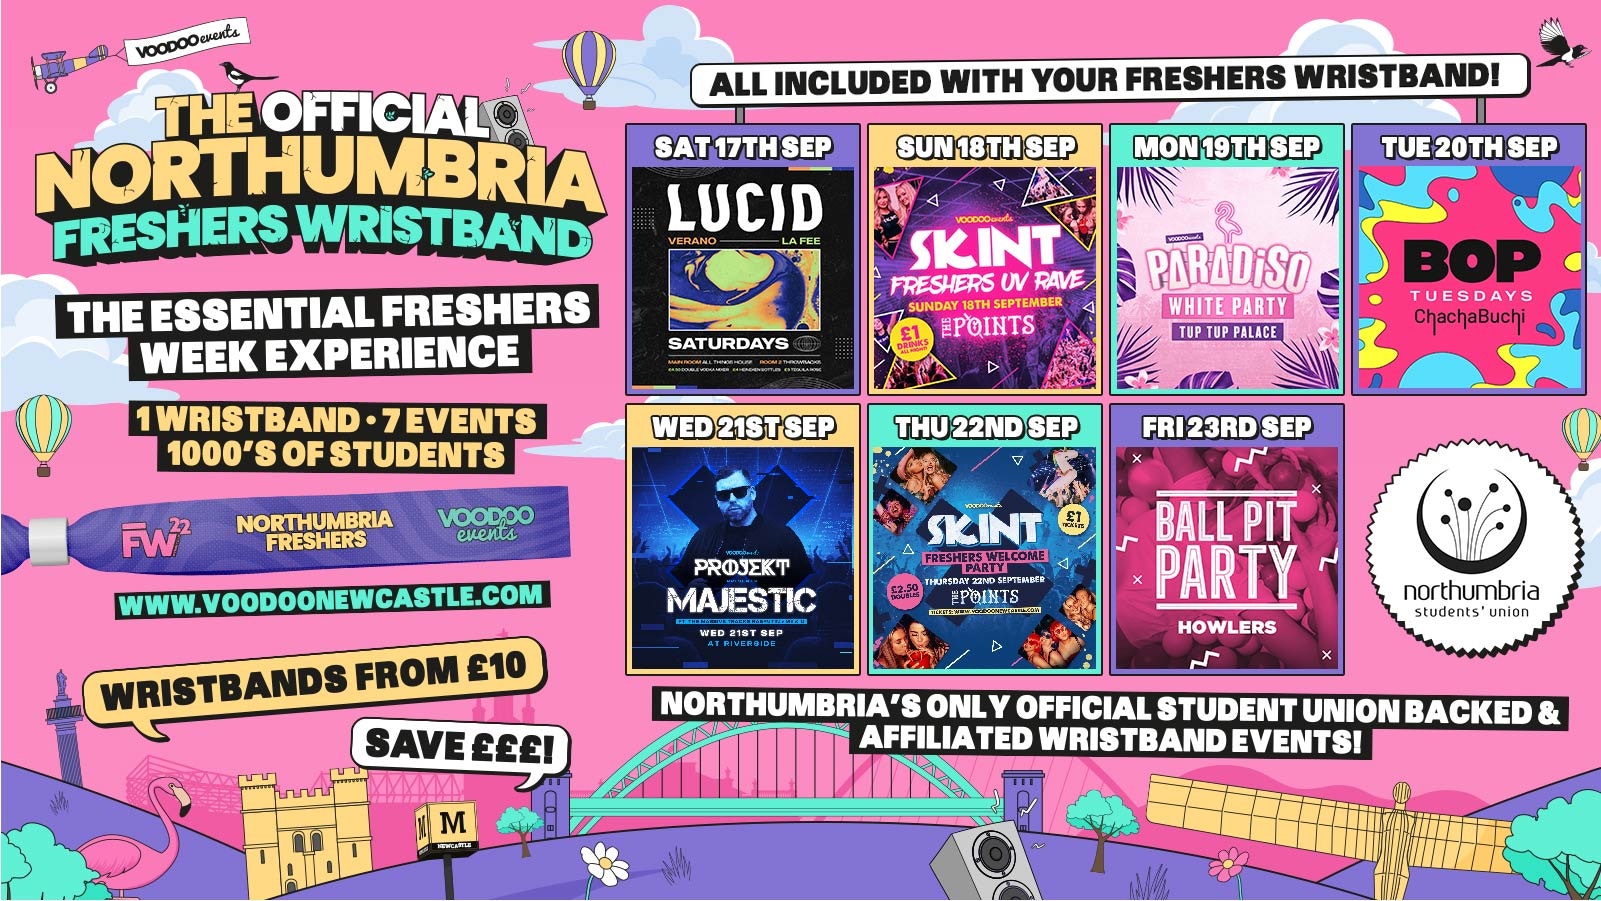 The OFFICIAL Northumbria Freshers Wristband